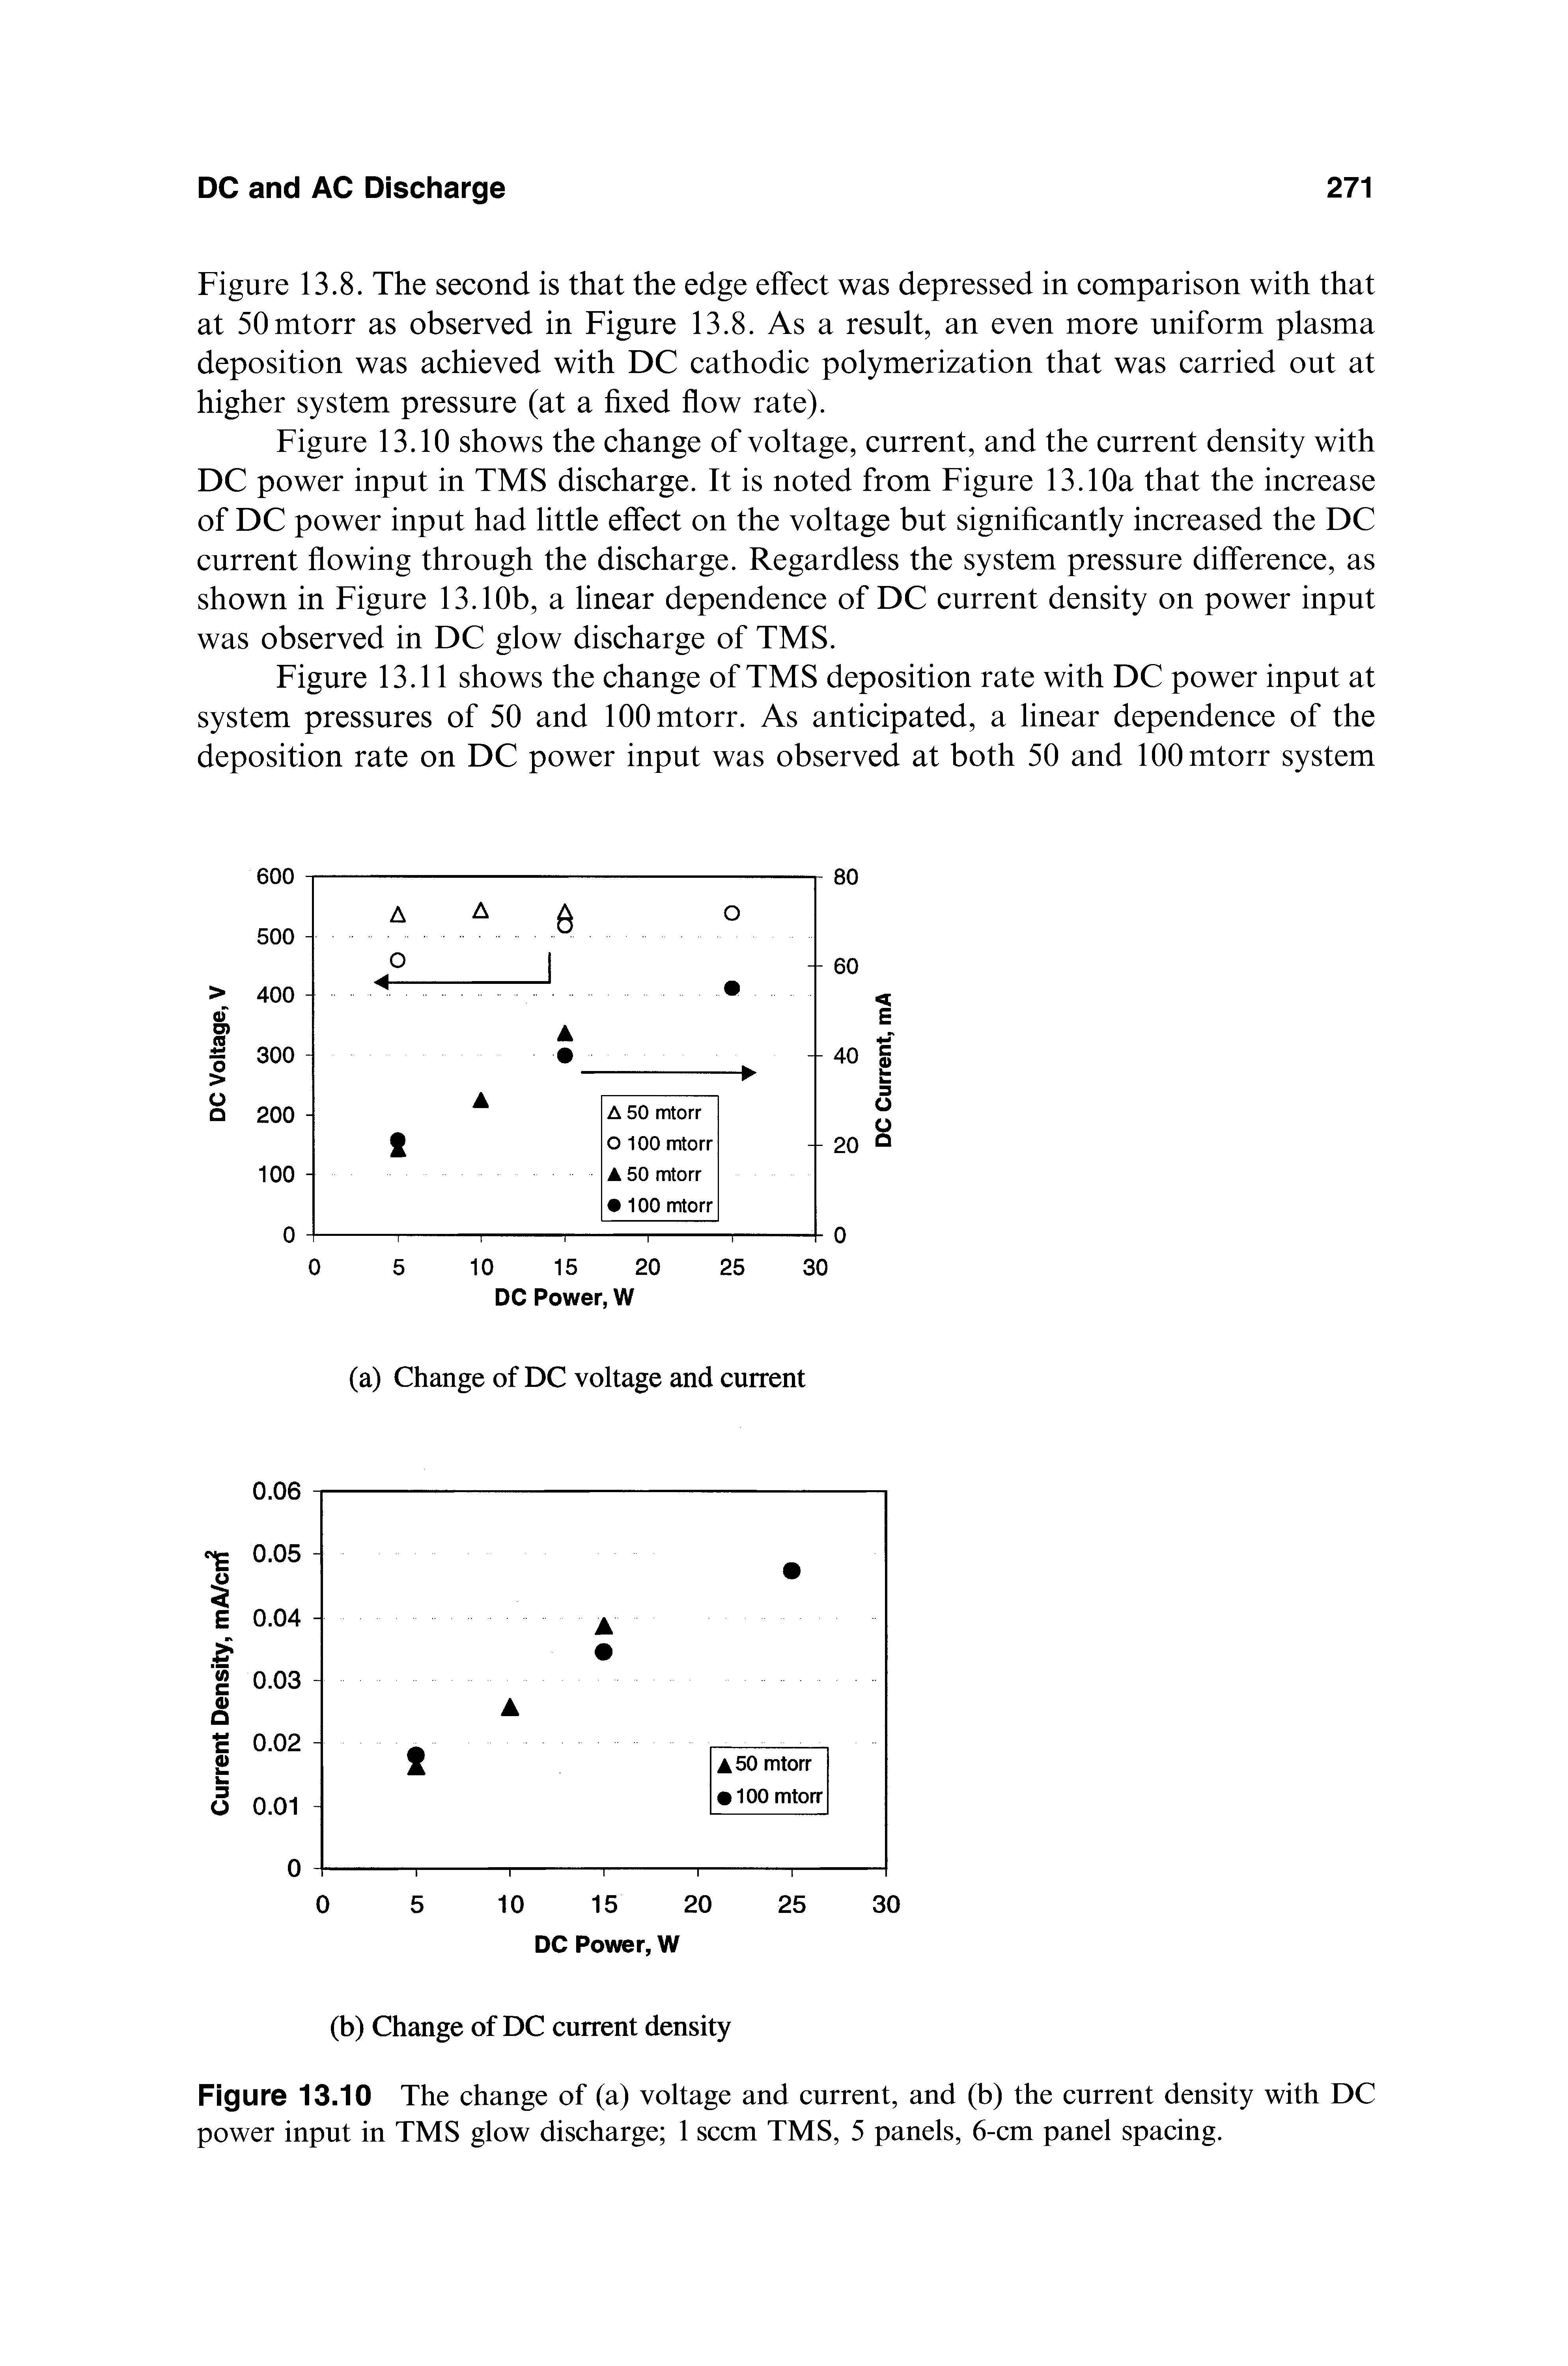 Figure 13.8. The second is that the edge effect was depressed in comparison with that at 50mtorr as observed in Figure 13.8. As a result, an even more uniform plasma deposition was achieved with DC cathodic polymerization that was carried out at higher system pressure (at a fixed flow rate).